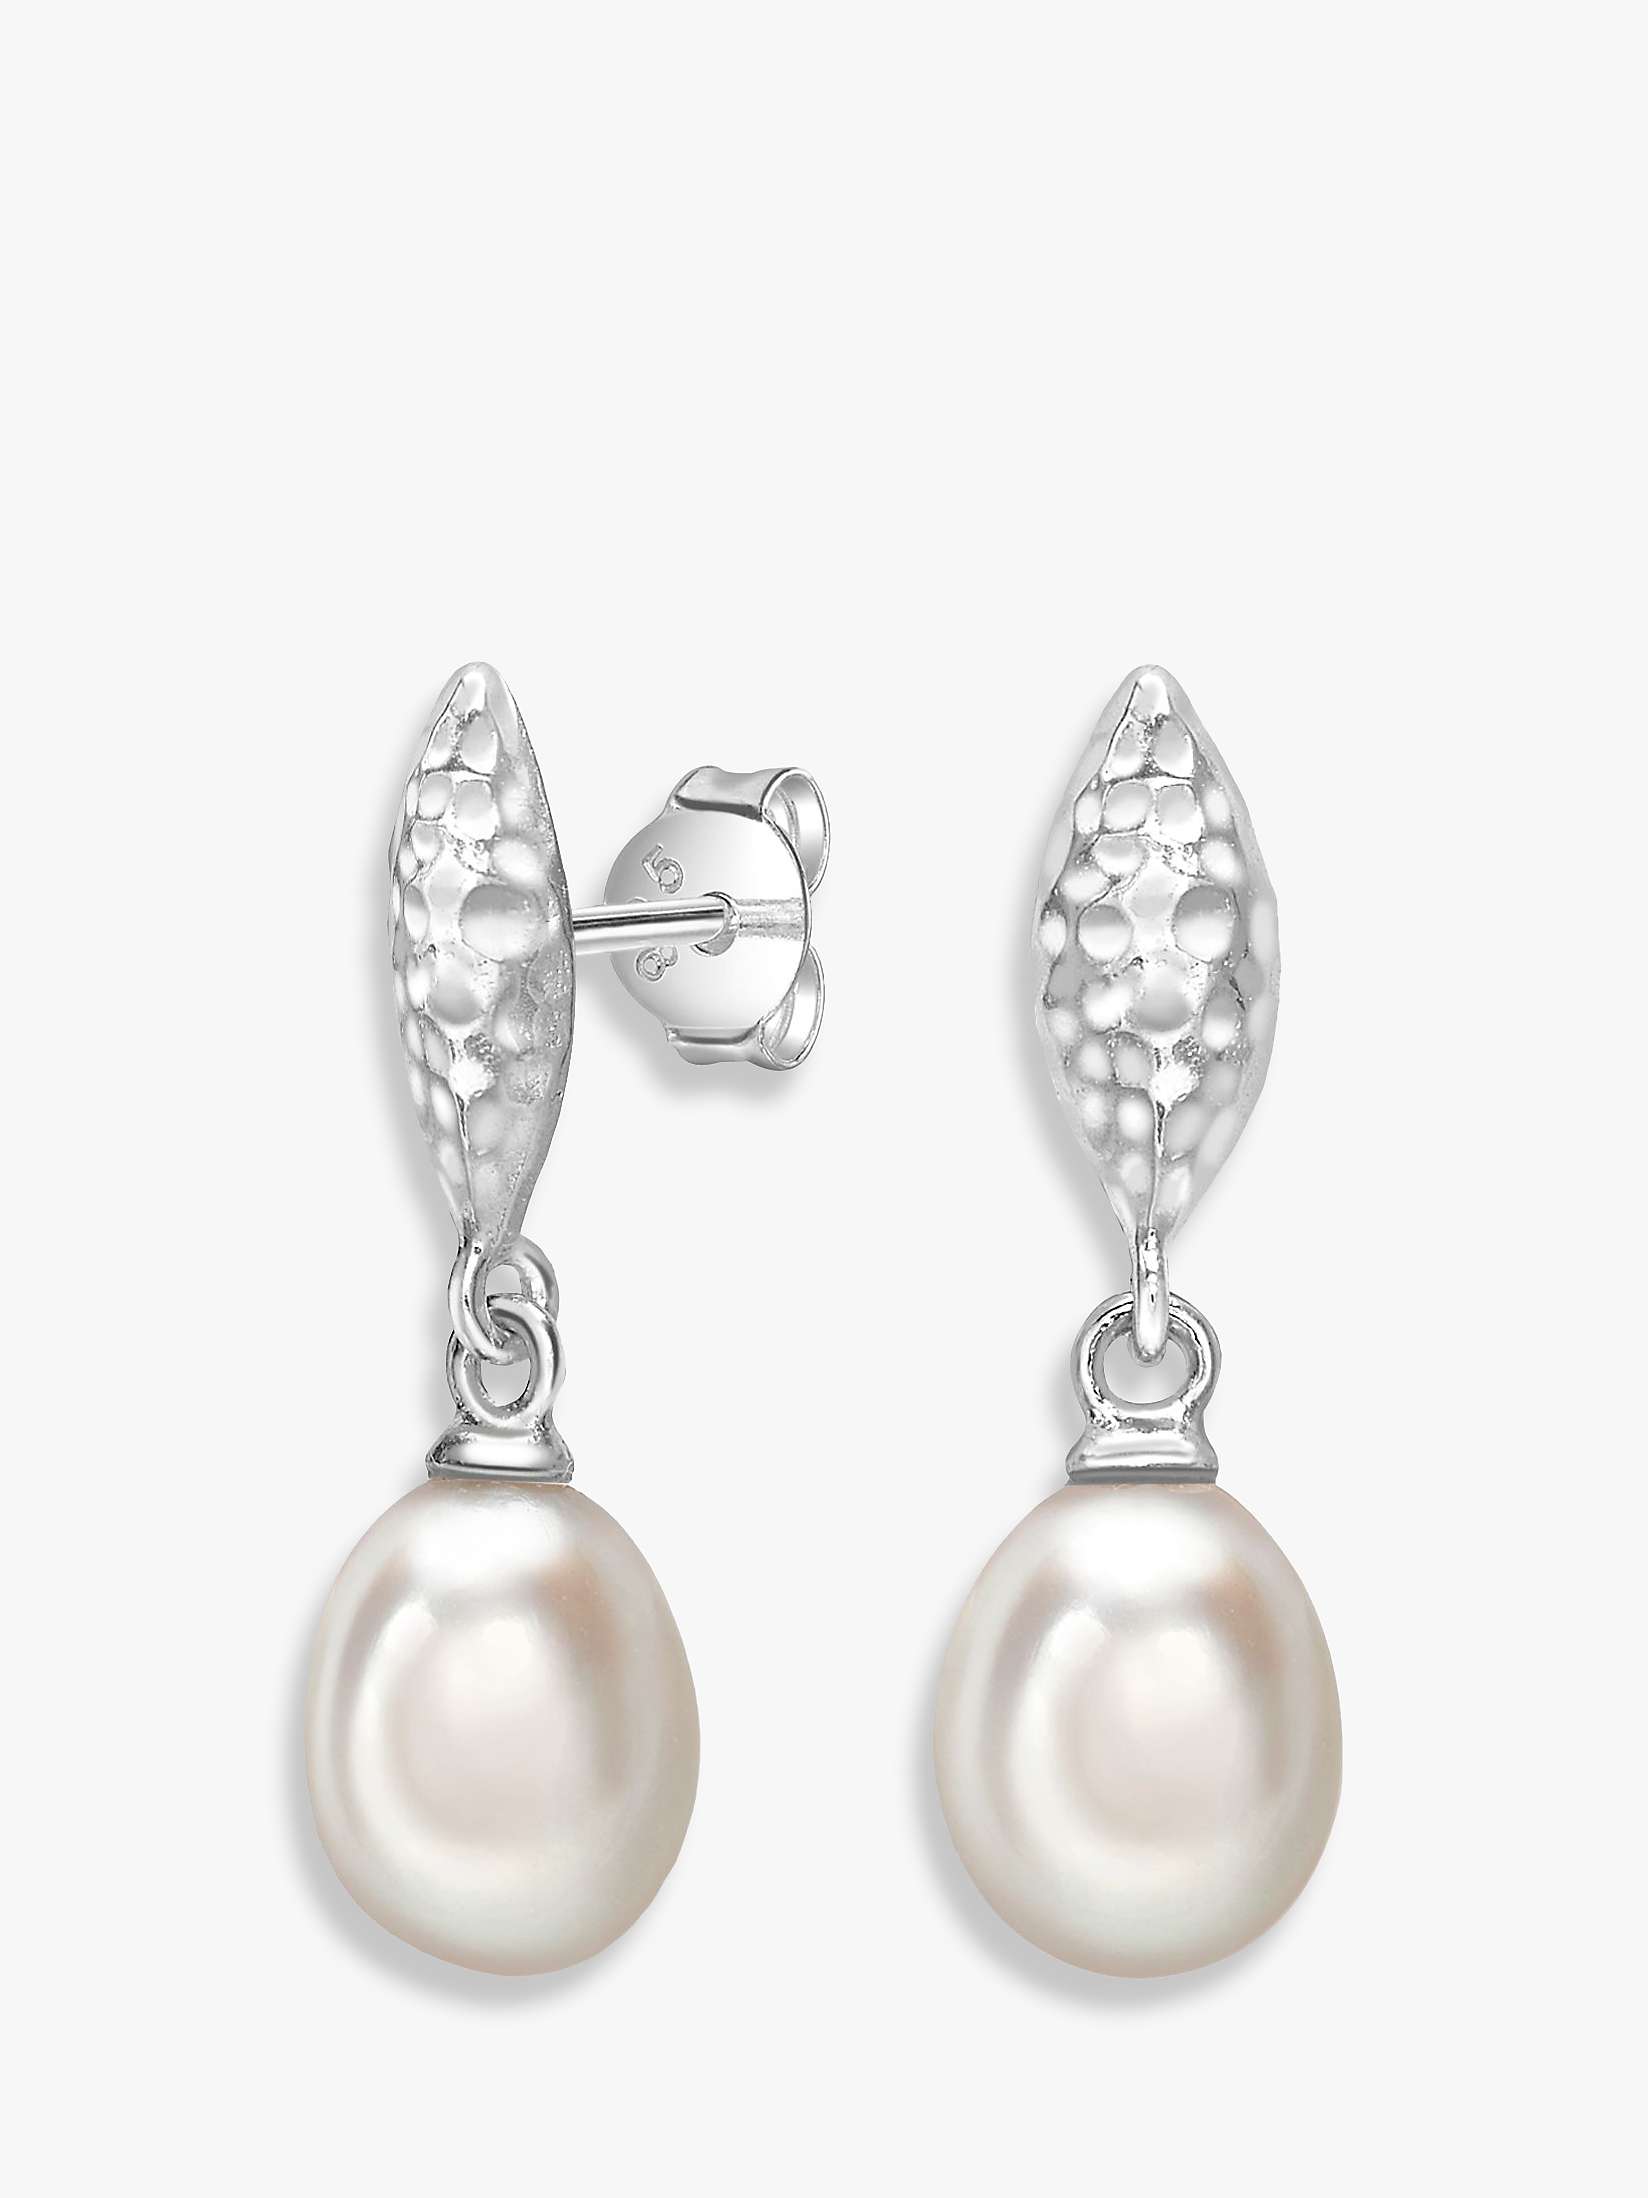 Buy Dower & Hall Hammered Freshwater Pearl Drop Earrings, Silver/White Online at johnlewis.com